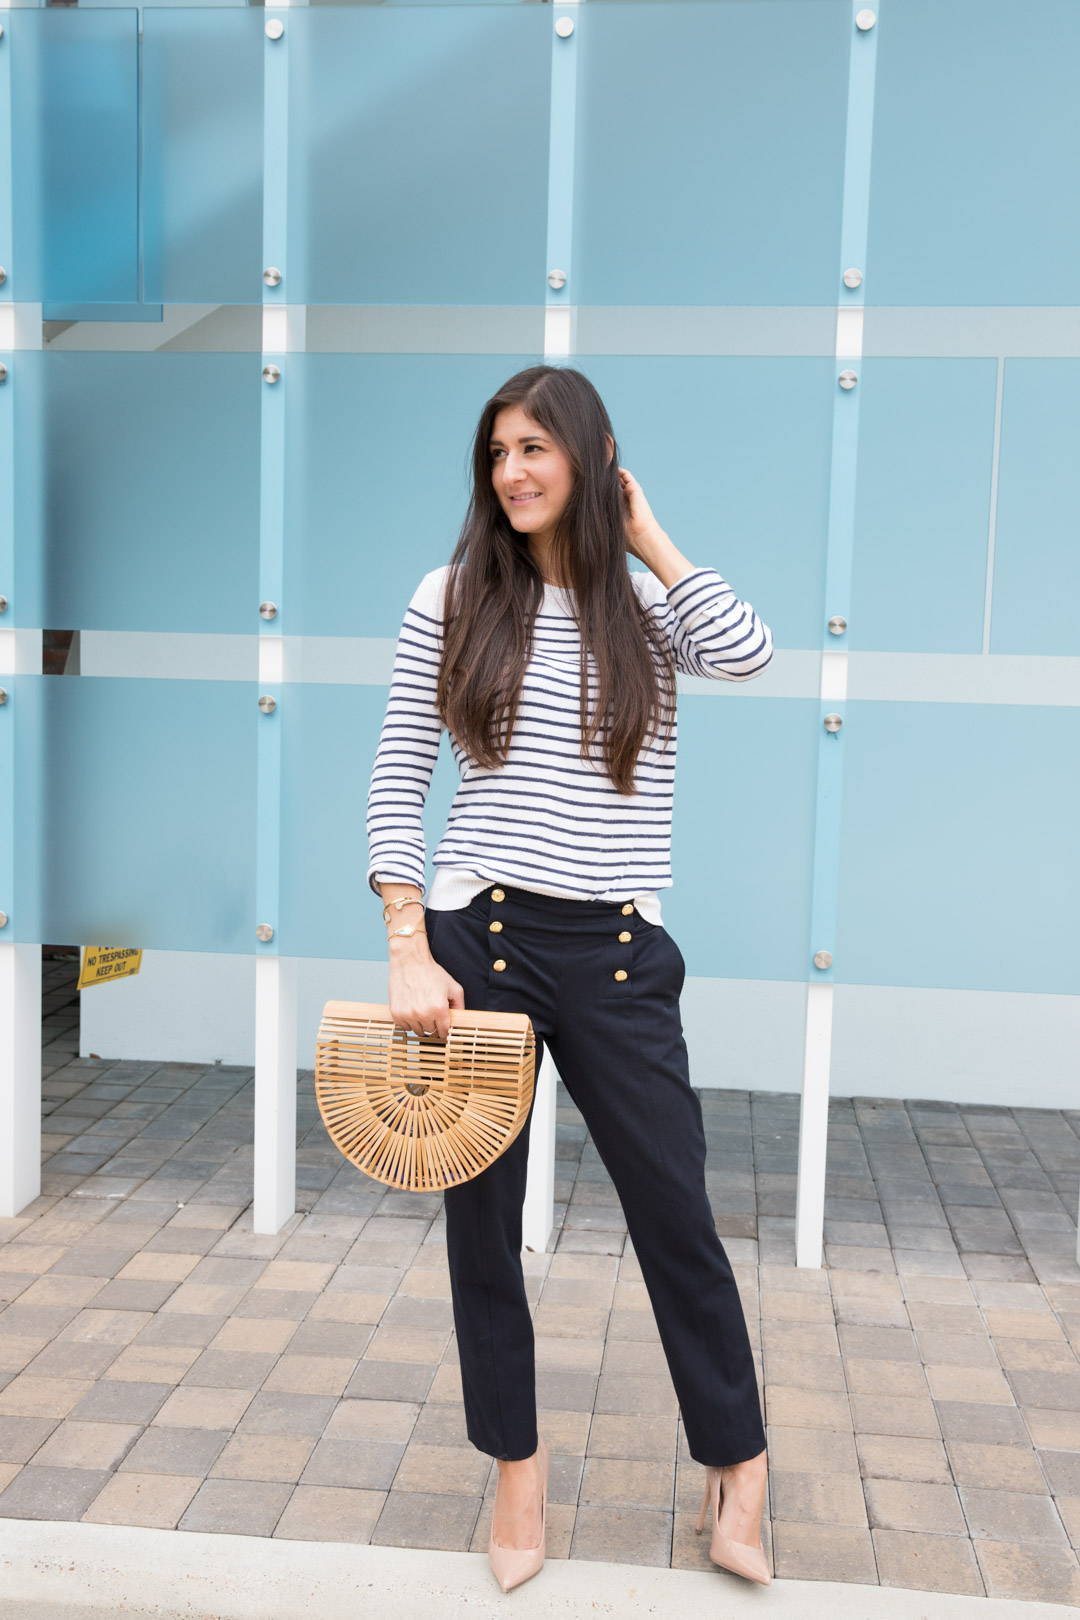 Fall Work Outfit Inspiration: What to wear to work during the fall season. | The Fashionable Maven